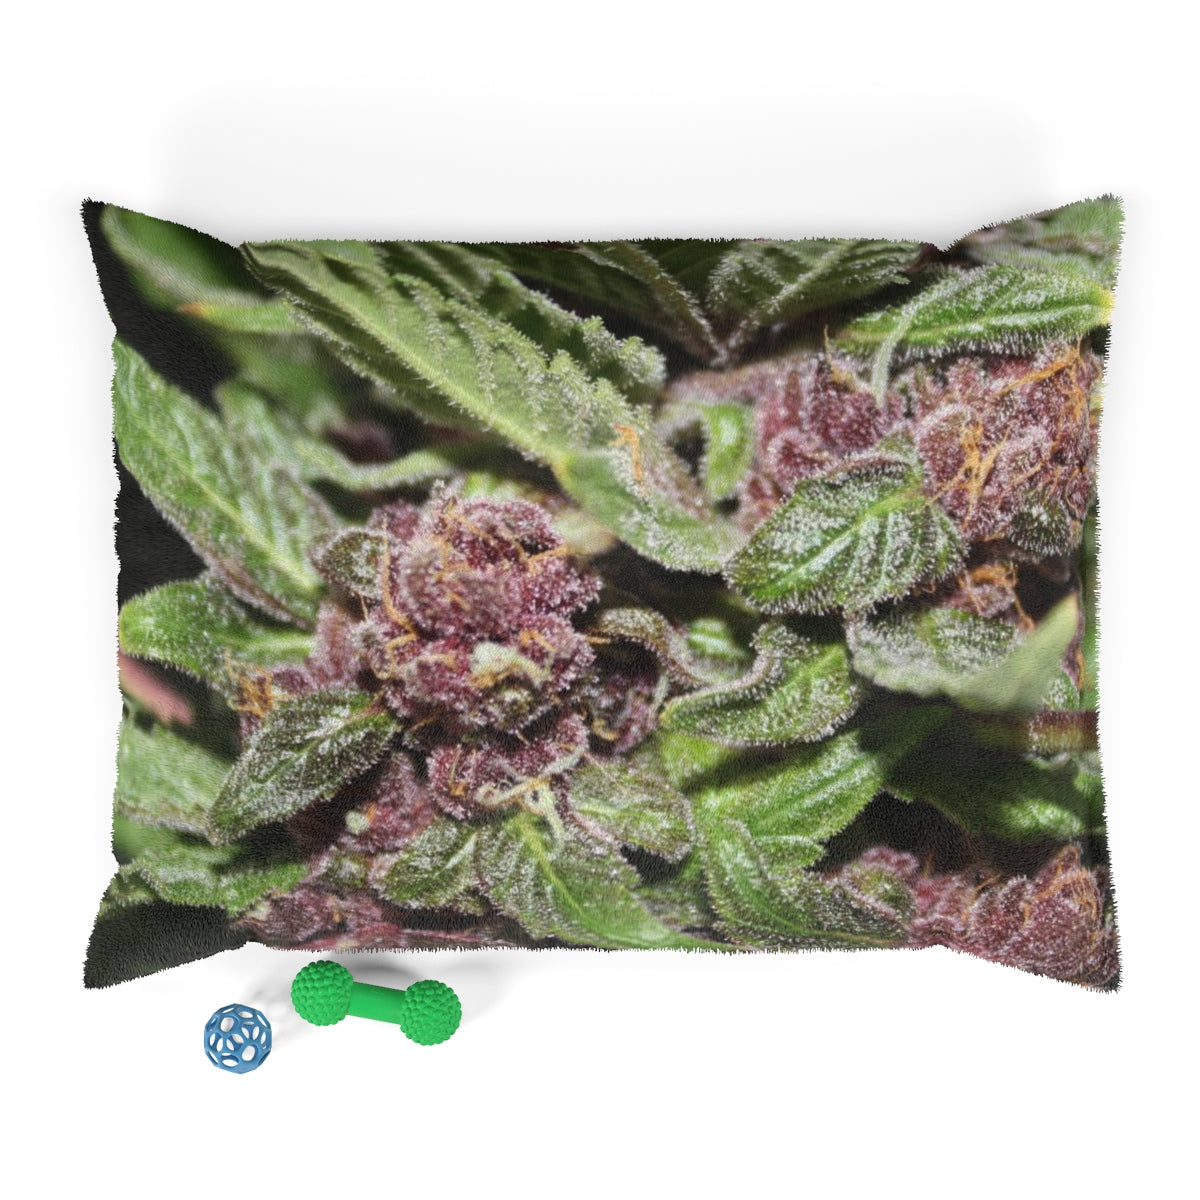 The Cannabis Bud Pet Bed